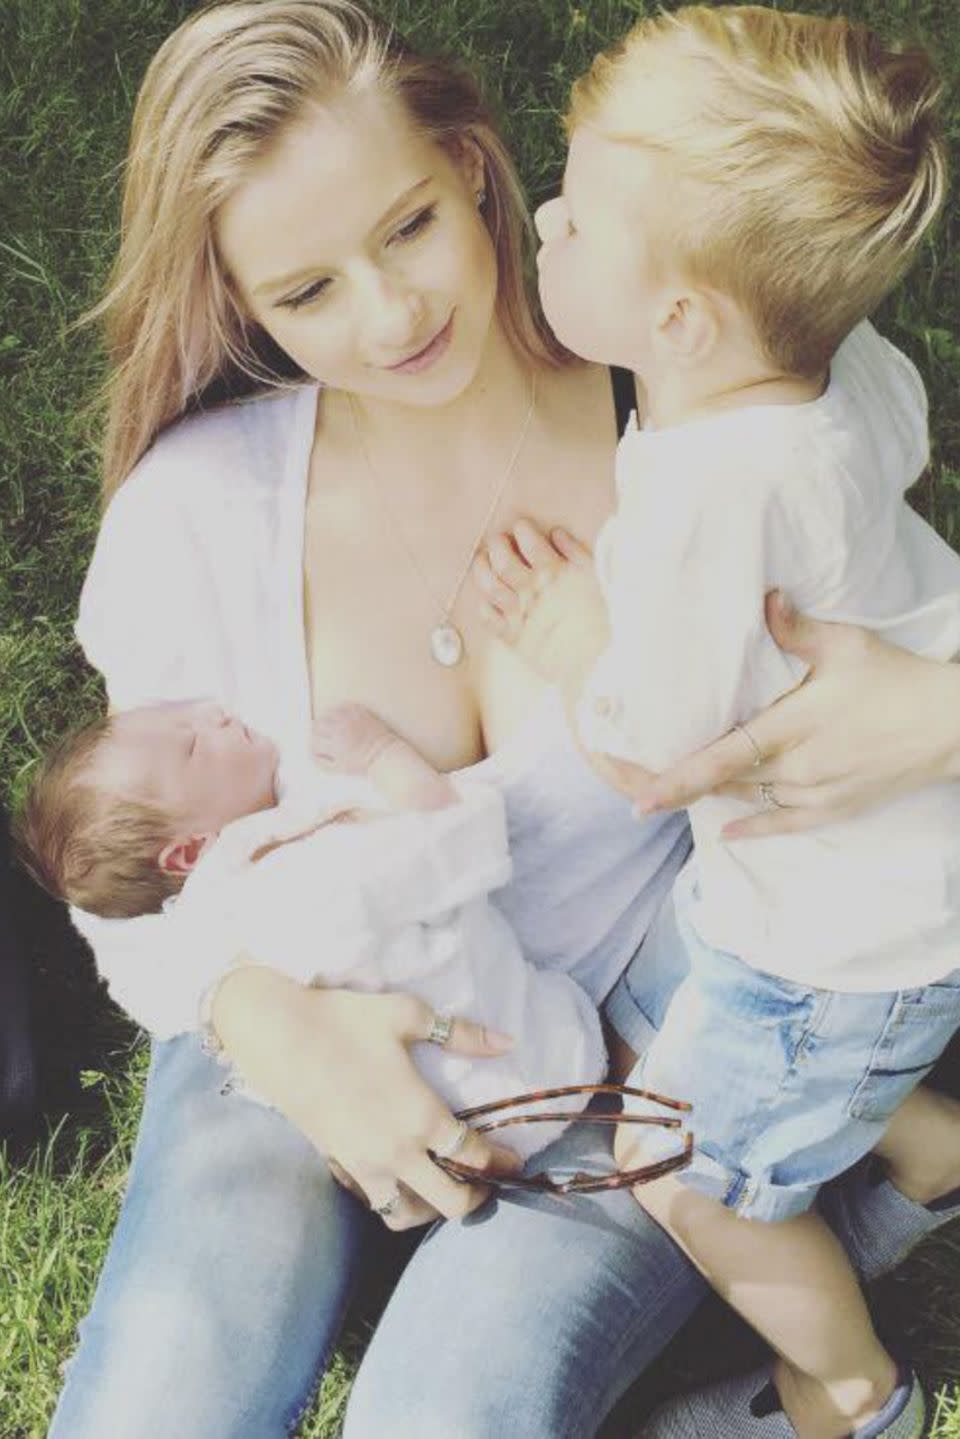 Joelle welcomed baby India six months ago. Photo: Caters News